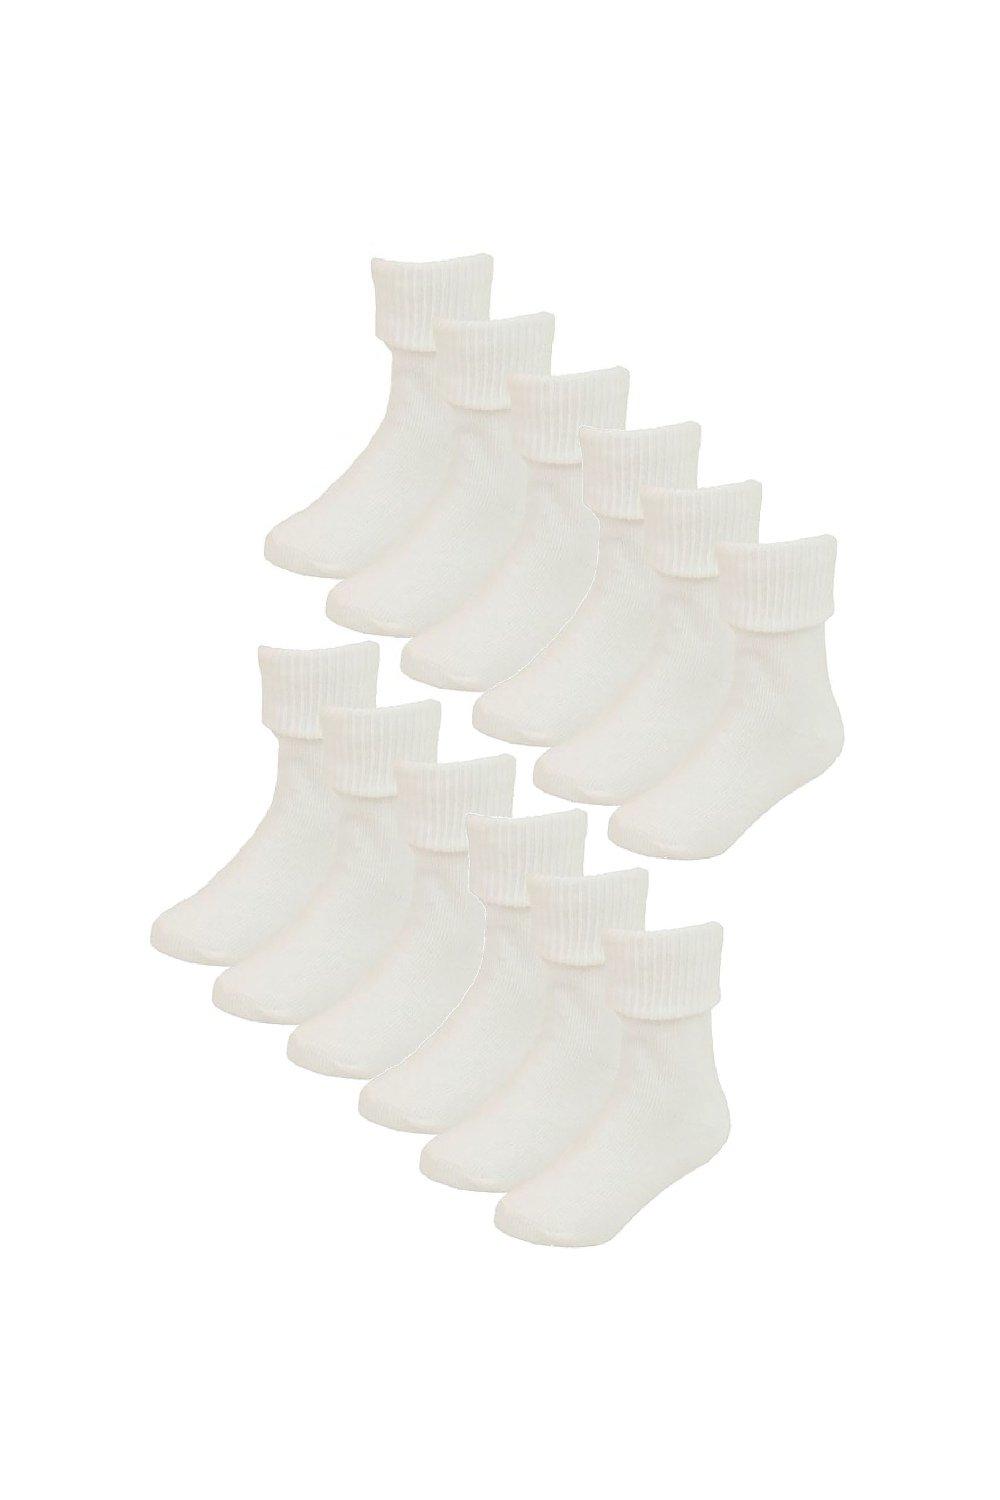 6 Pairs Plain Turn Over Top Soft Cotton Socks for Babies